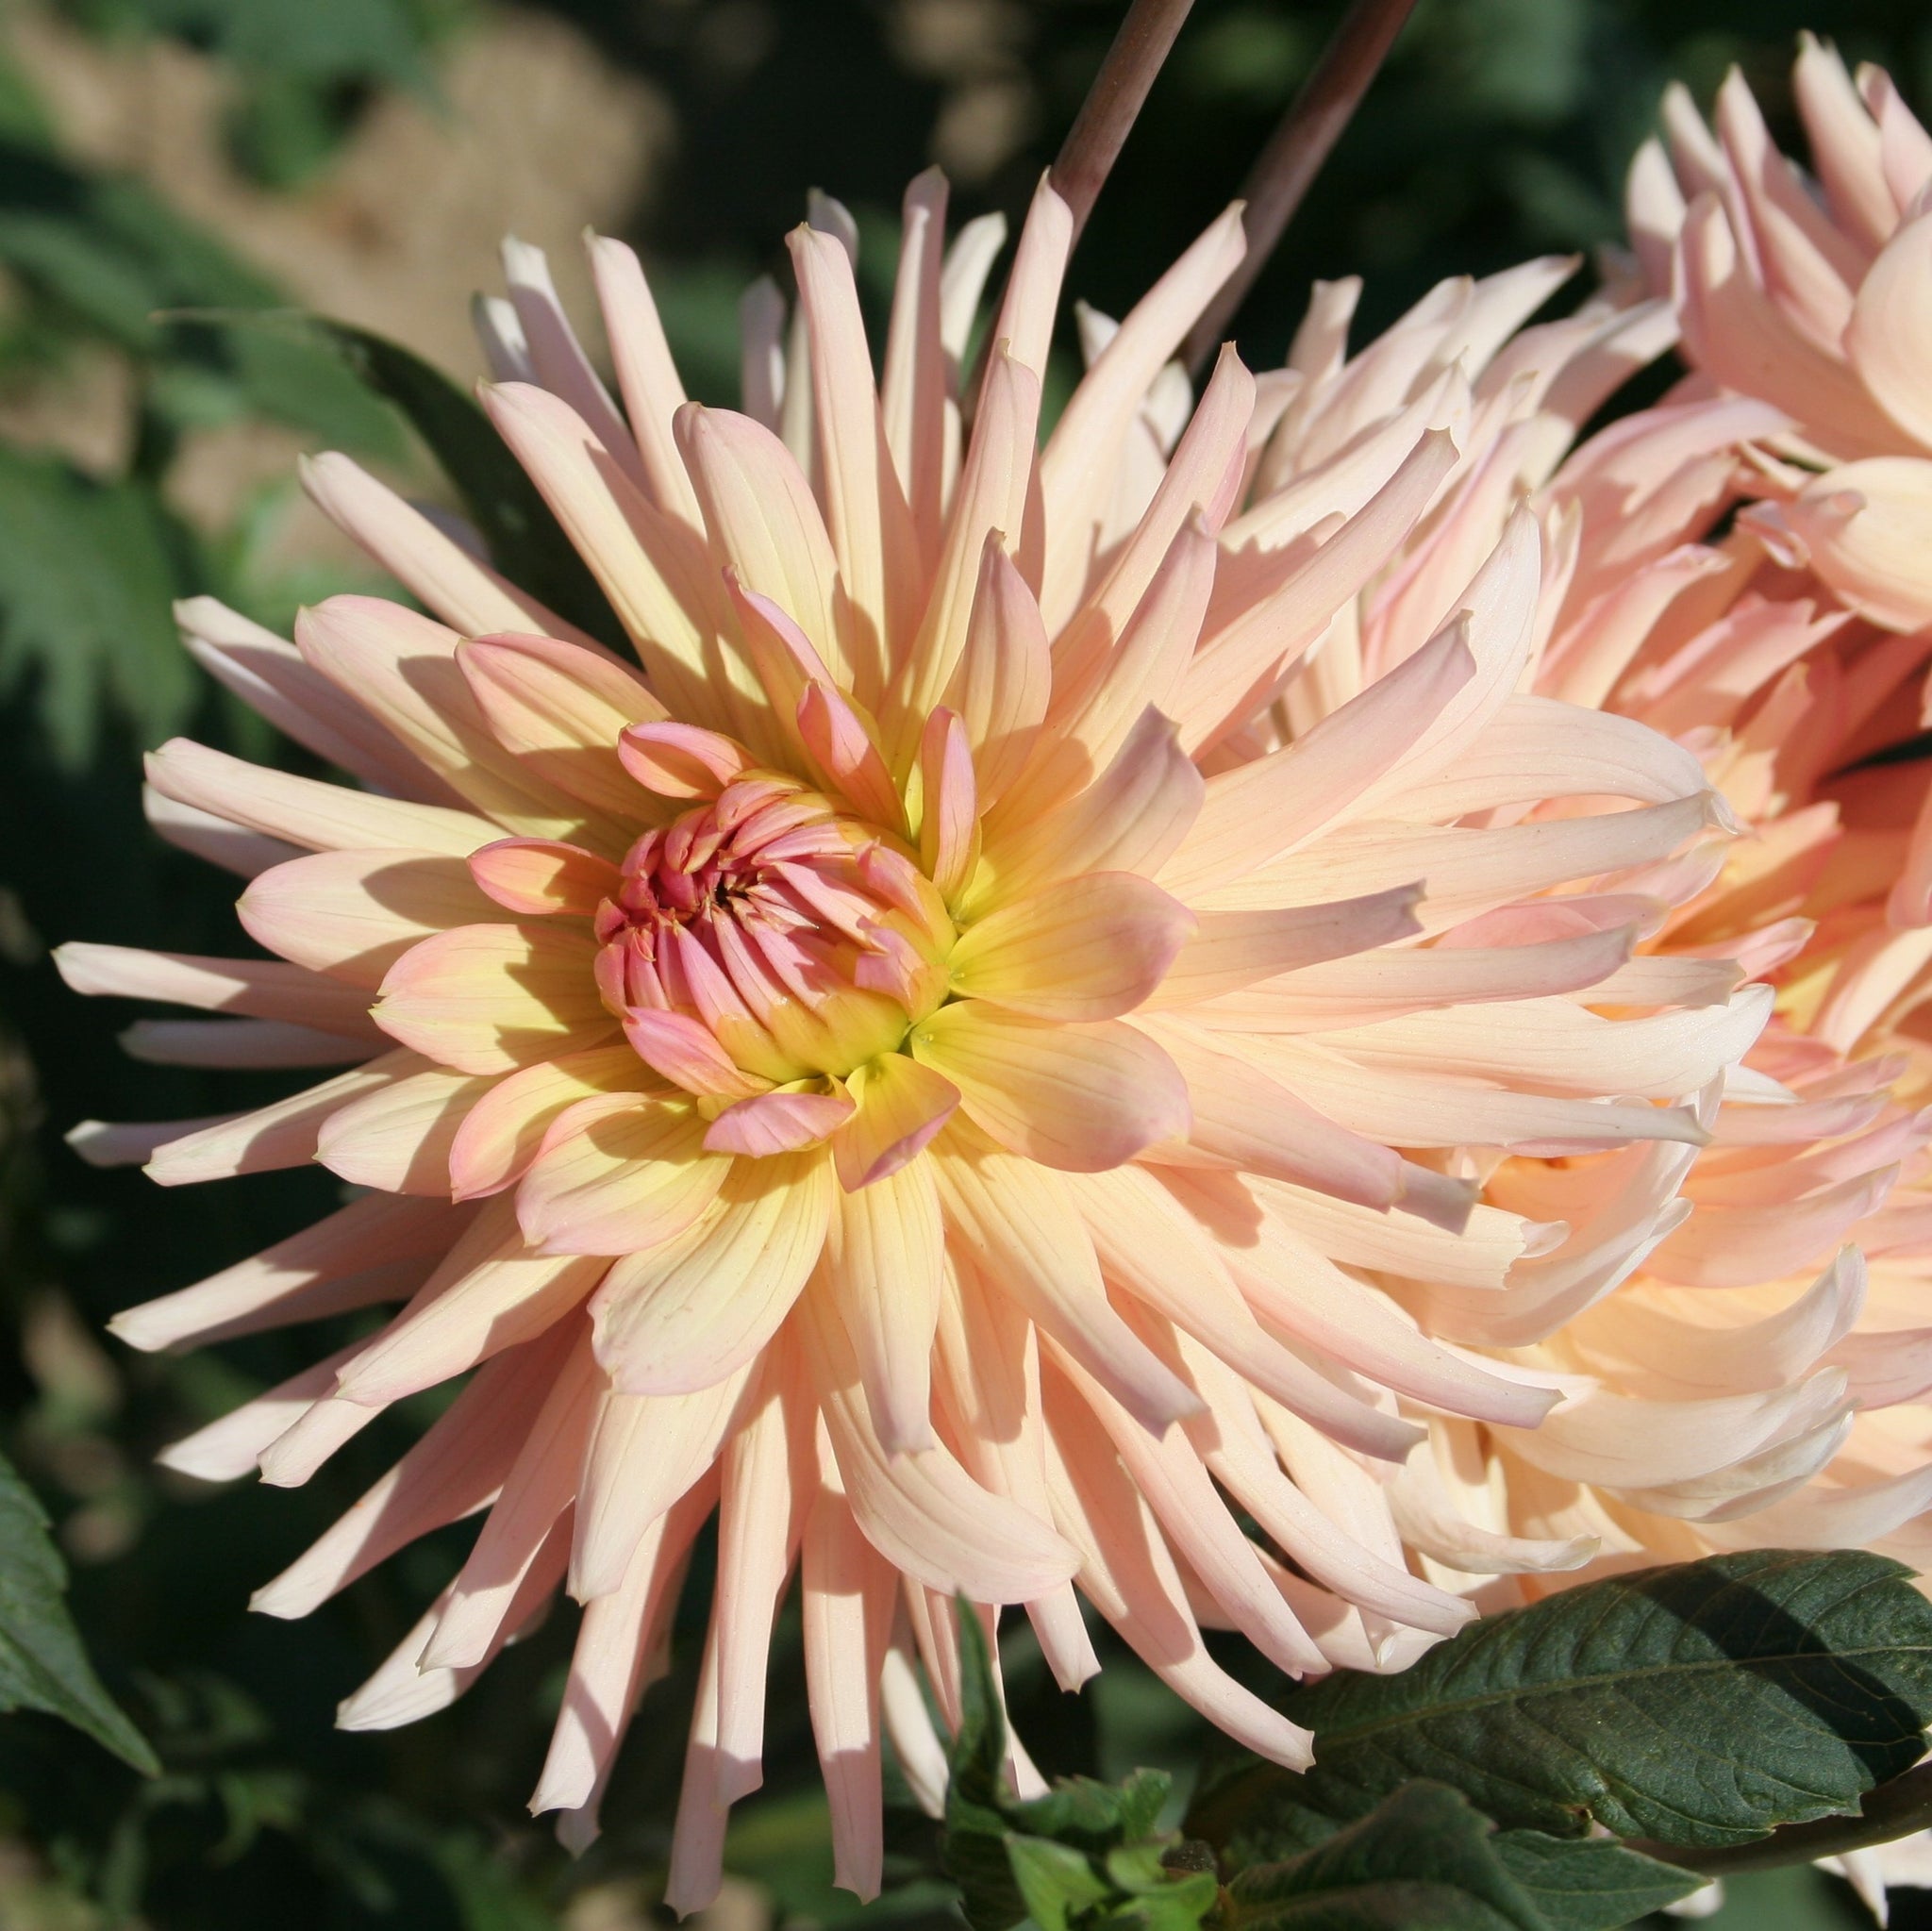 Dahlia 'Henriette' is a magnificent and eye-catching dahlia which displays sparkling salmon-pink blossoms, delicately fading to cream towards the tips of their elongated petals. When the light hits the blooms, they shimmer and it is bedazzling sight to behold! Buy dahlia tubers online www.lilysgardenstore.com